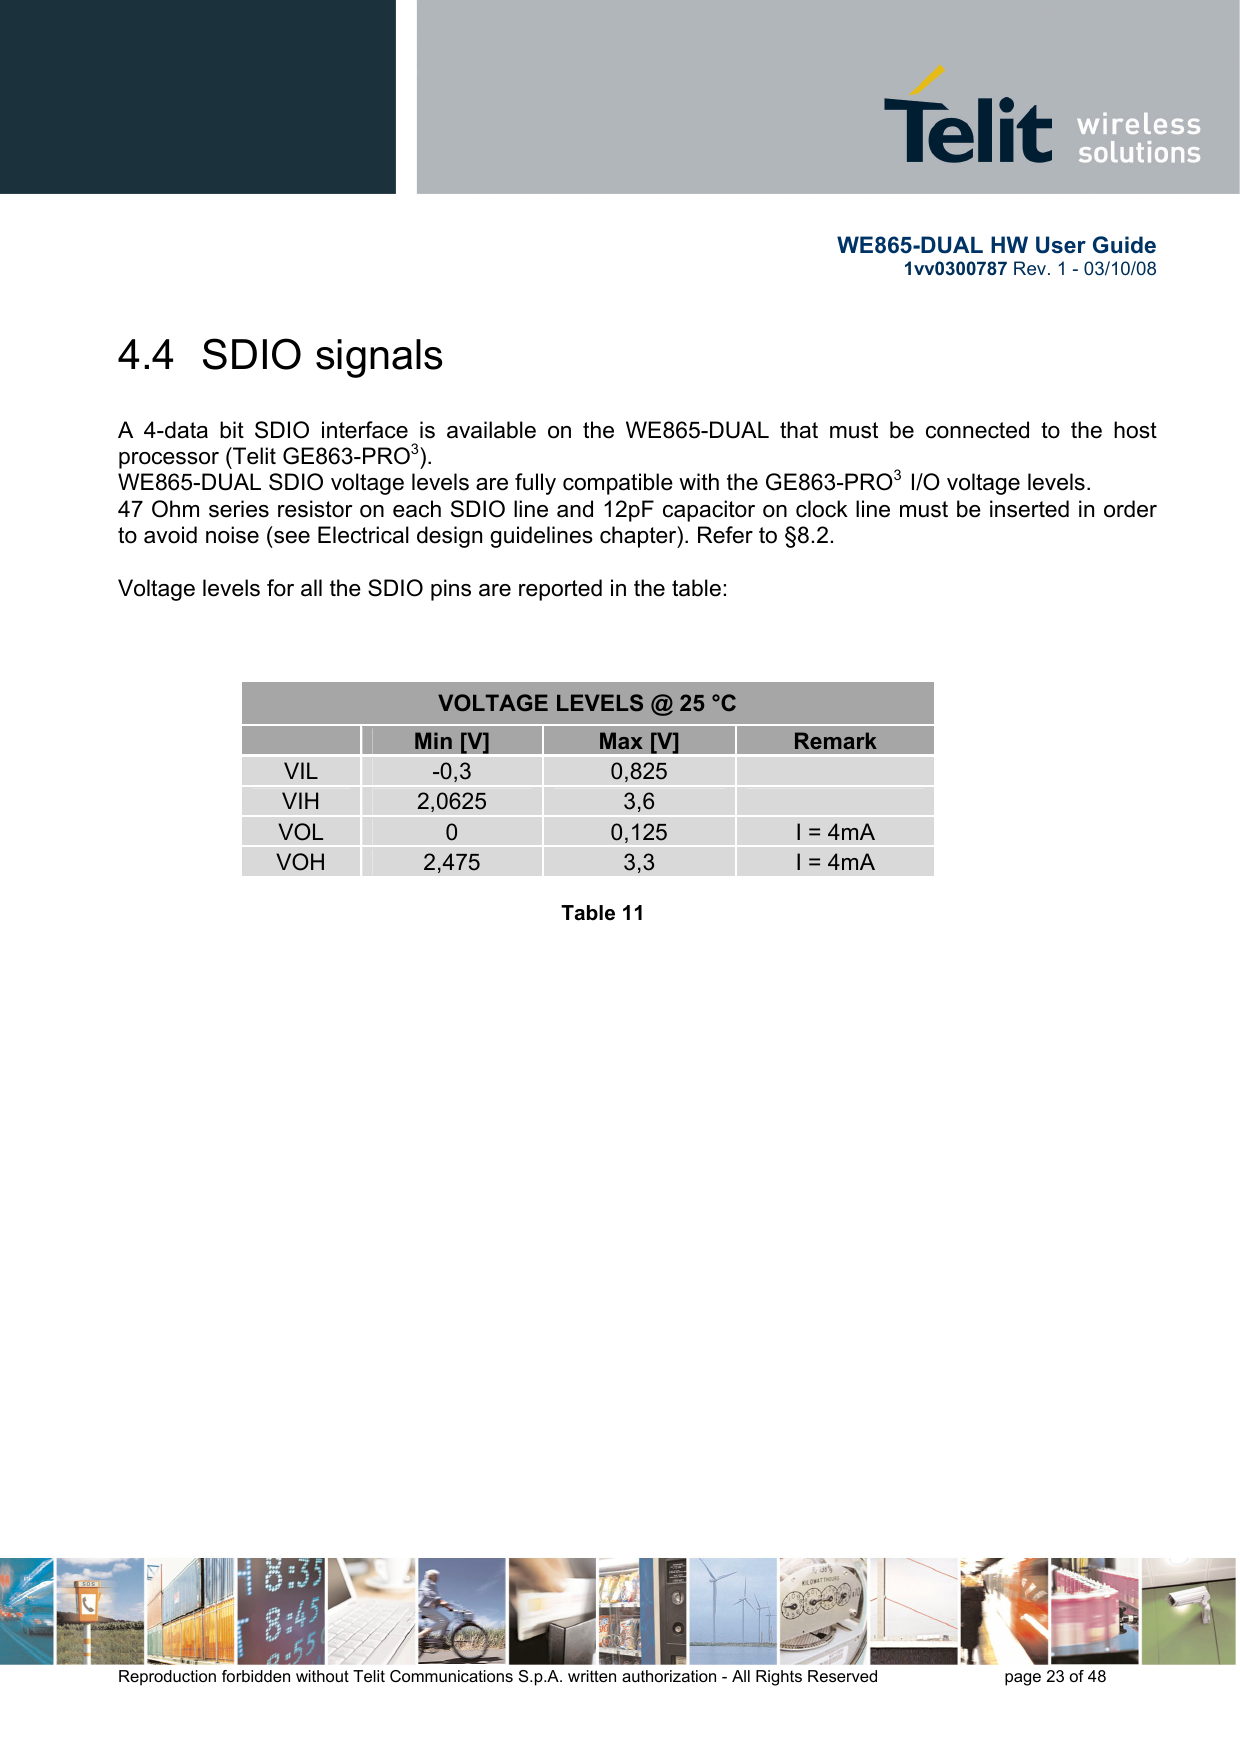       WE865-DUAL HW User Guide 1vv0300787 Rev. 1 - 03/10/08      Reproduction forbidden without Telit Communications S.p.A. written authorization - All Rights Reserved    page 23 of 48  4.4  SDIO signals  A 4-data bit SDIO interface is available on the WE865-DUAL that must be connected to the host processor (Telit GE863-PRO3).  WE865-DUAL SDIO voltage levels are fully compatible with the GE863-PRO3  I/O voltage levels.  47 Ohm series resistor on each SDIO line and 12pF capacitor on clock line must be inserted in order to avoid noise (see Electrical design guidelines chapter). Refer to §8.2.  Voltage levels for all the SDIO pins are reported in the table:    VOLTAGE LEVELS @ 25 °C    Min [V]  Max [V]  Remark VIL  -0,3  0,825    VIH  2,0625  3,6    VOL   0  0,125  I = 4mA VOH  2,475  3,3  I = 4mA  Table 11   